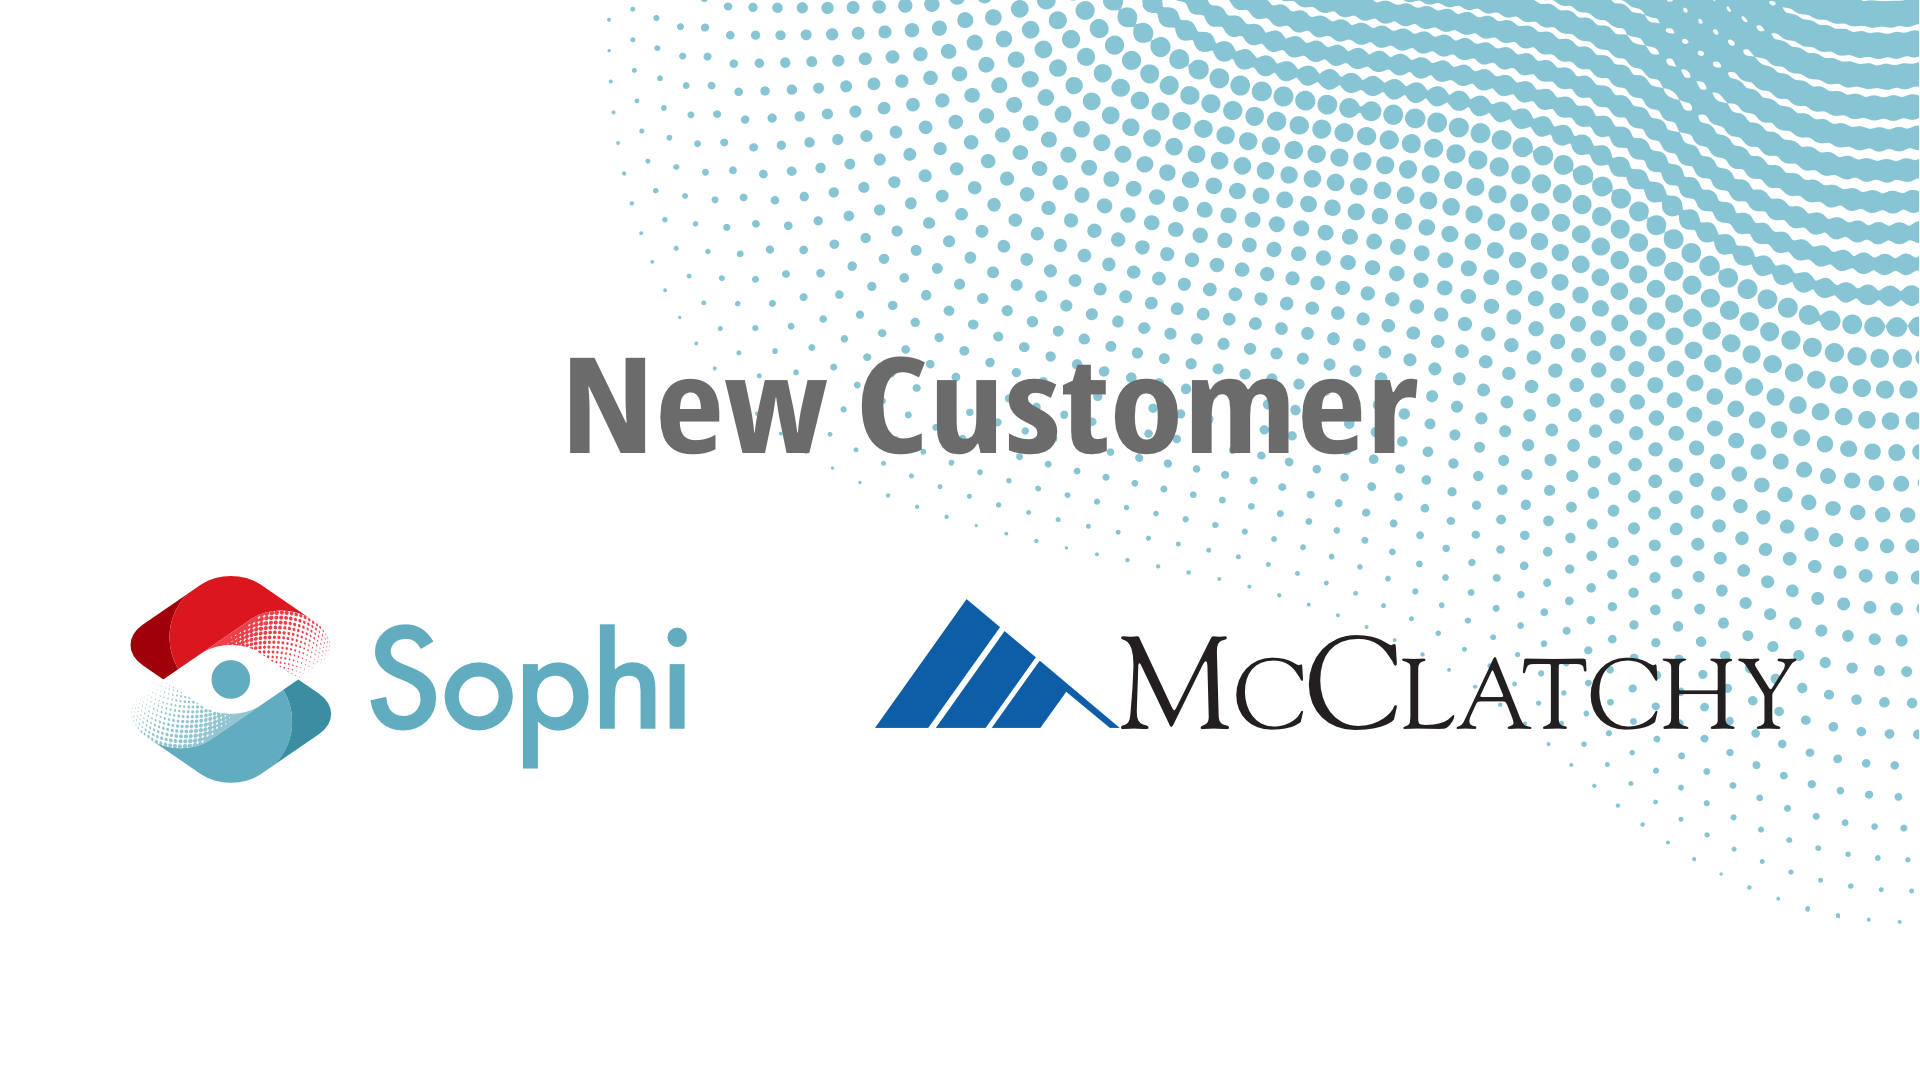 McClatchy is a new Sophi customer.